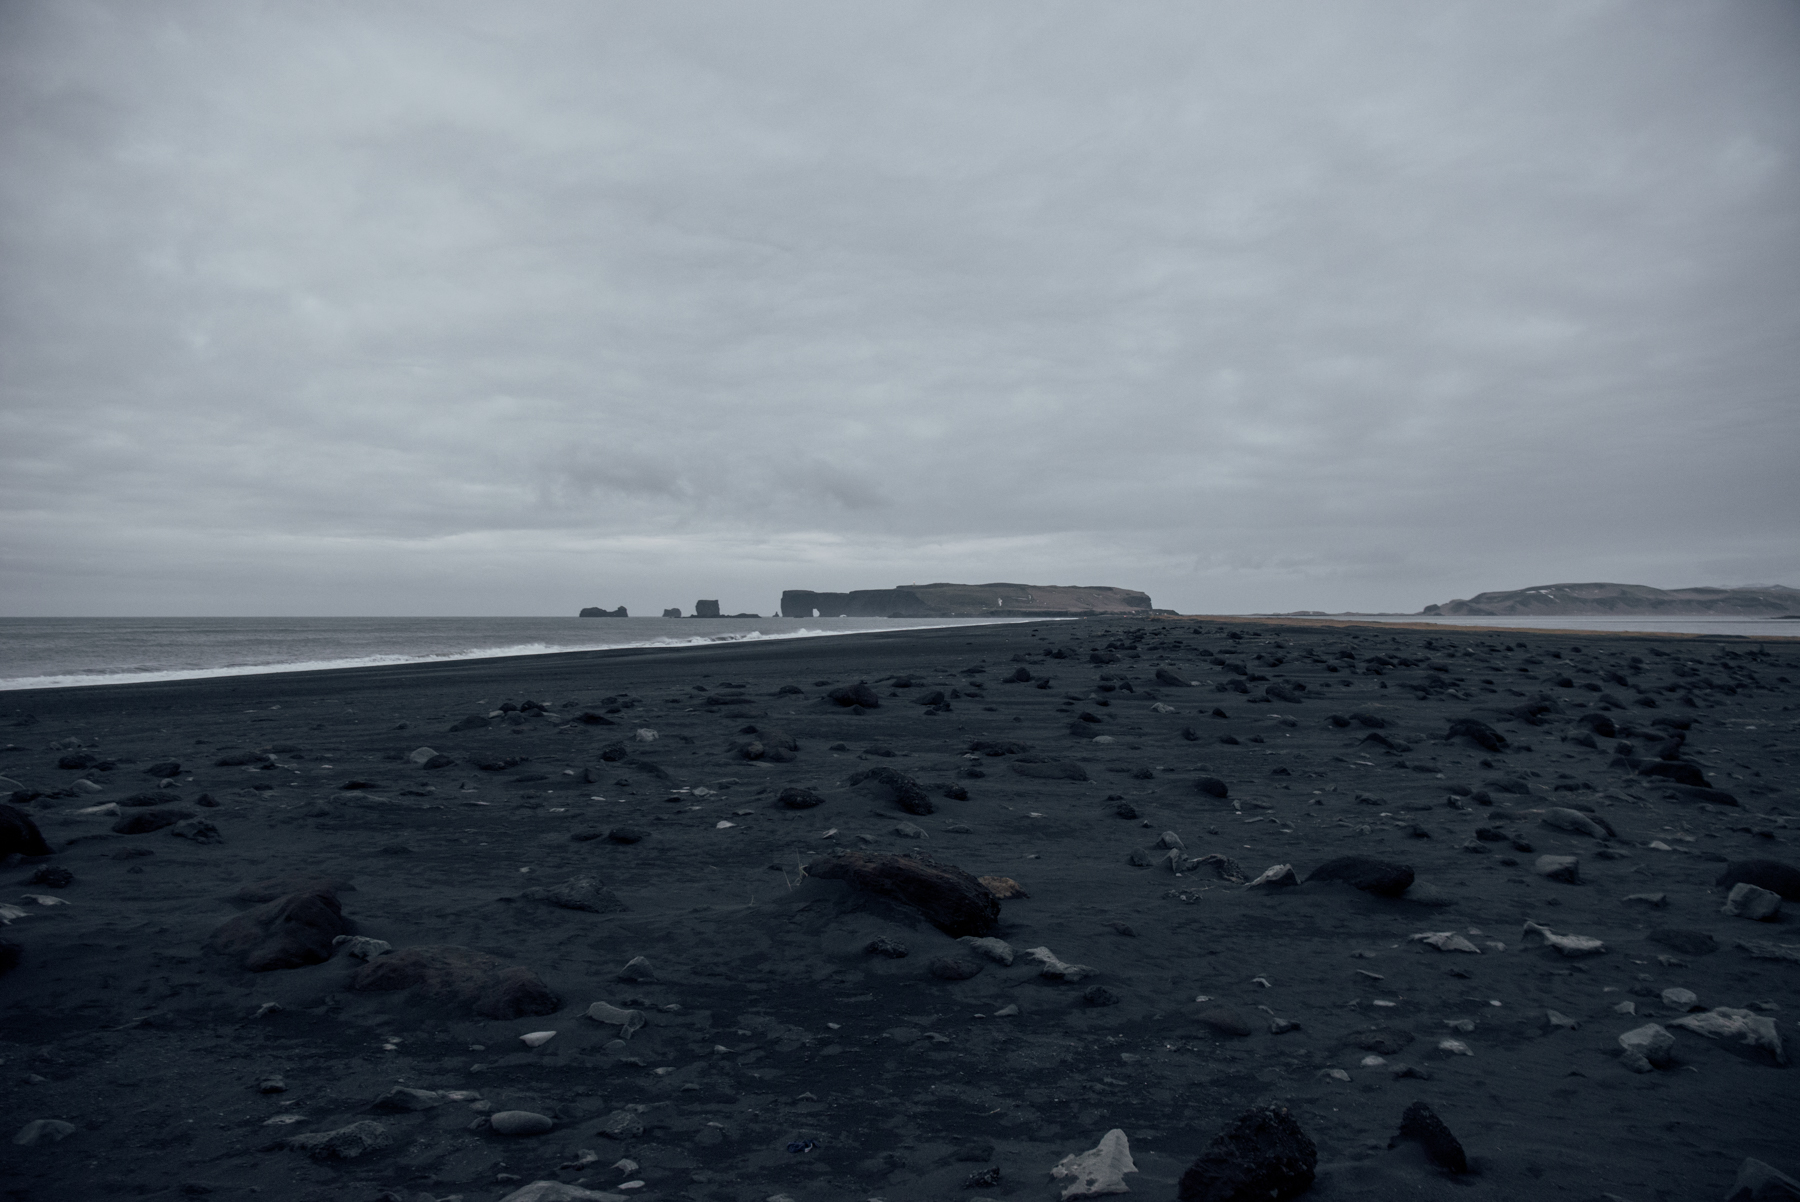 Iceland – Black Sand Beach near Vik. Trip to Iceland with Katie and Holly 1/1-1/7.